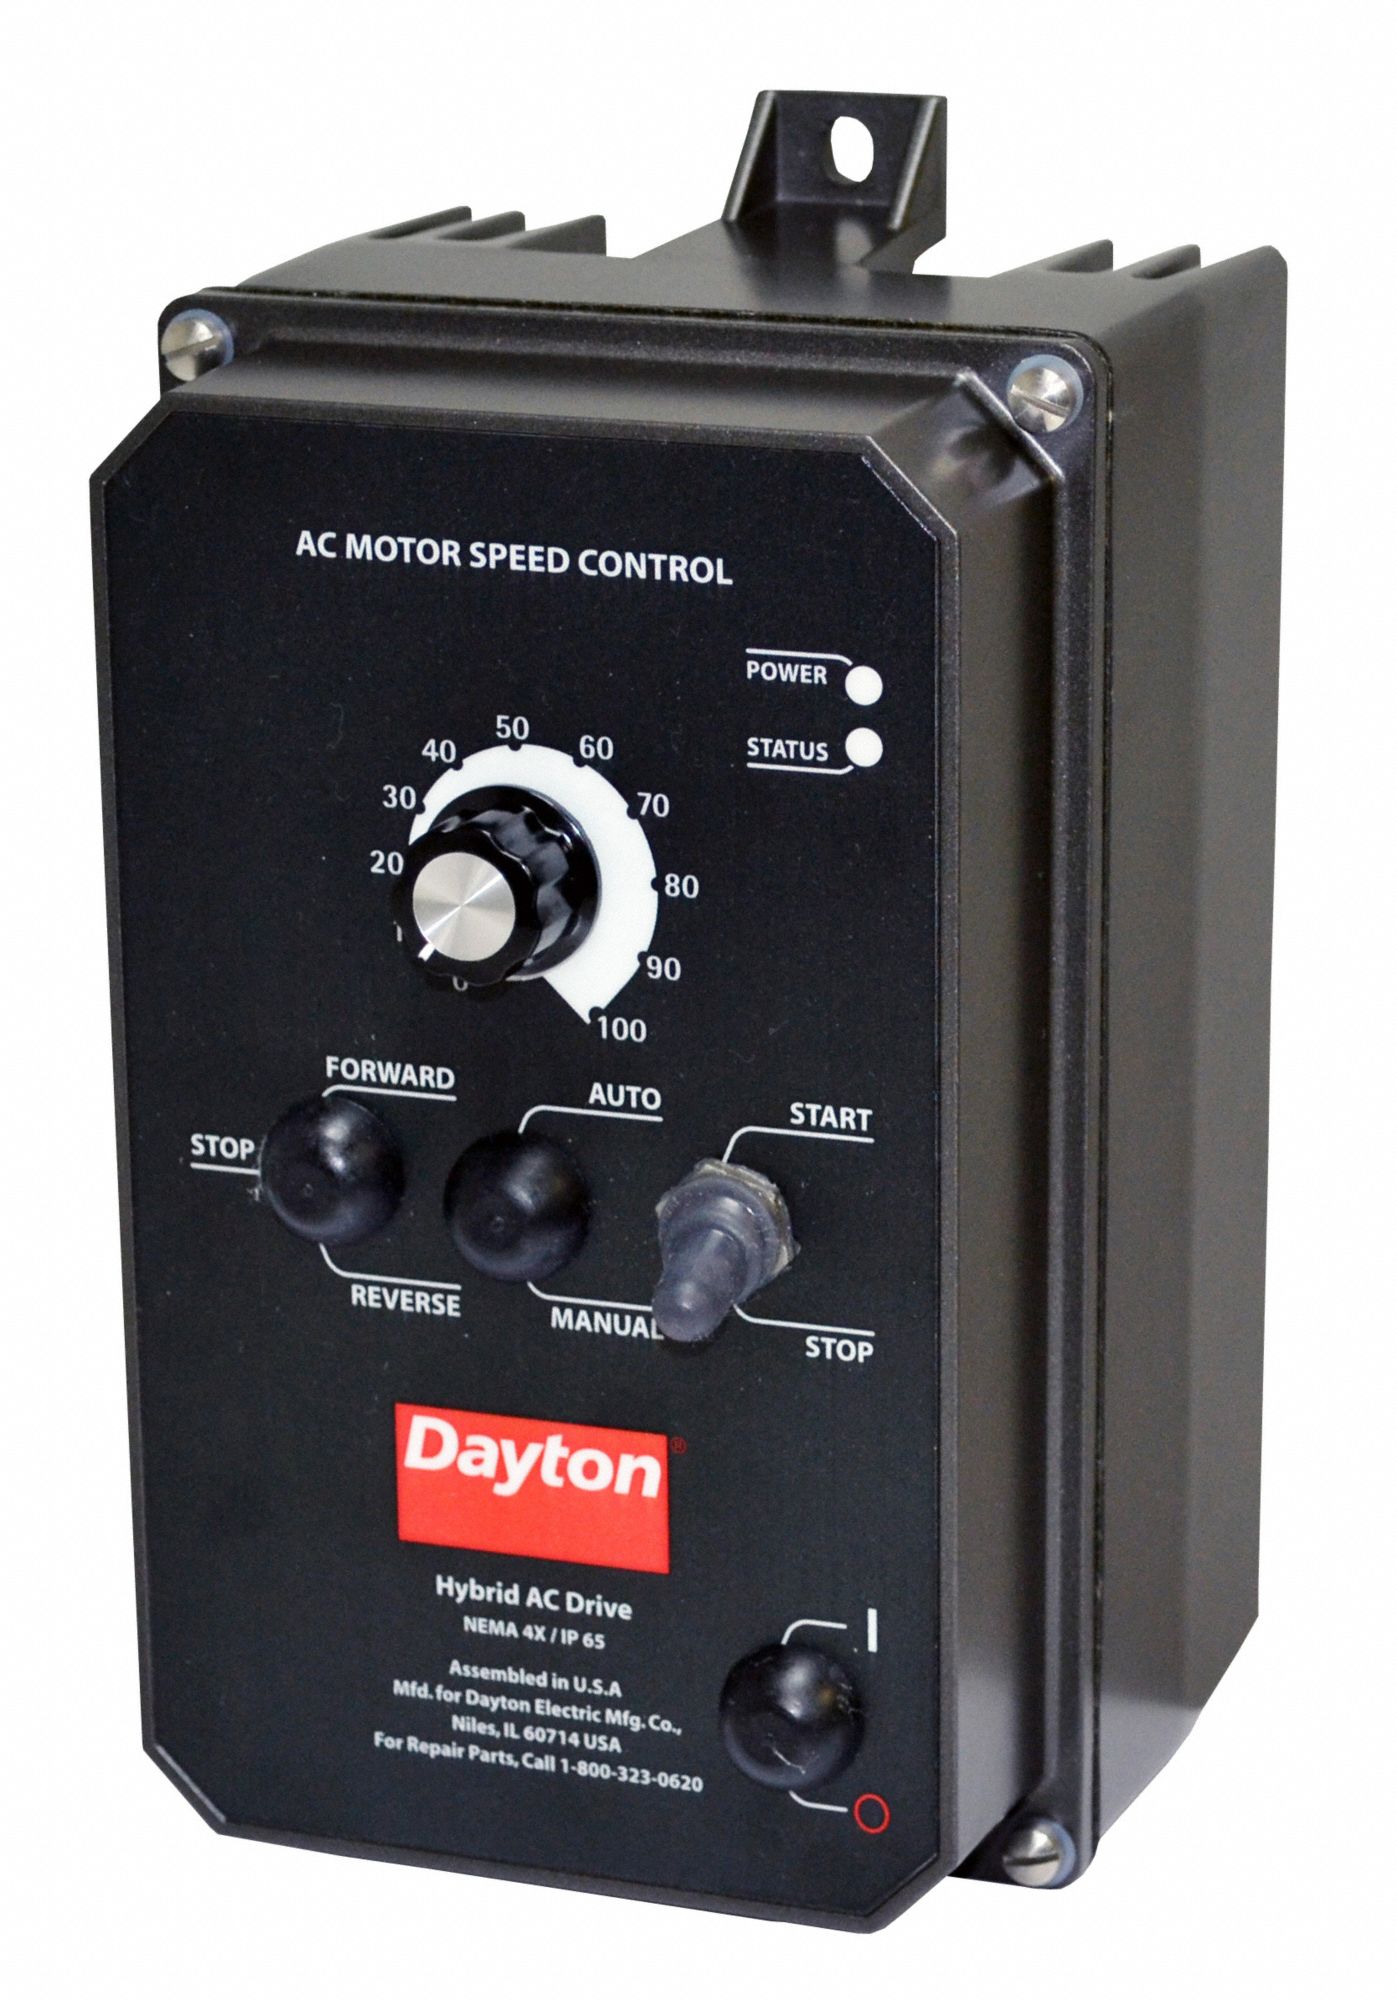 DAYTON Variable Frequency Drive,1 hp Max. HP,1 Input Phase AC,120/208